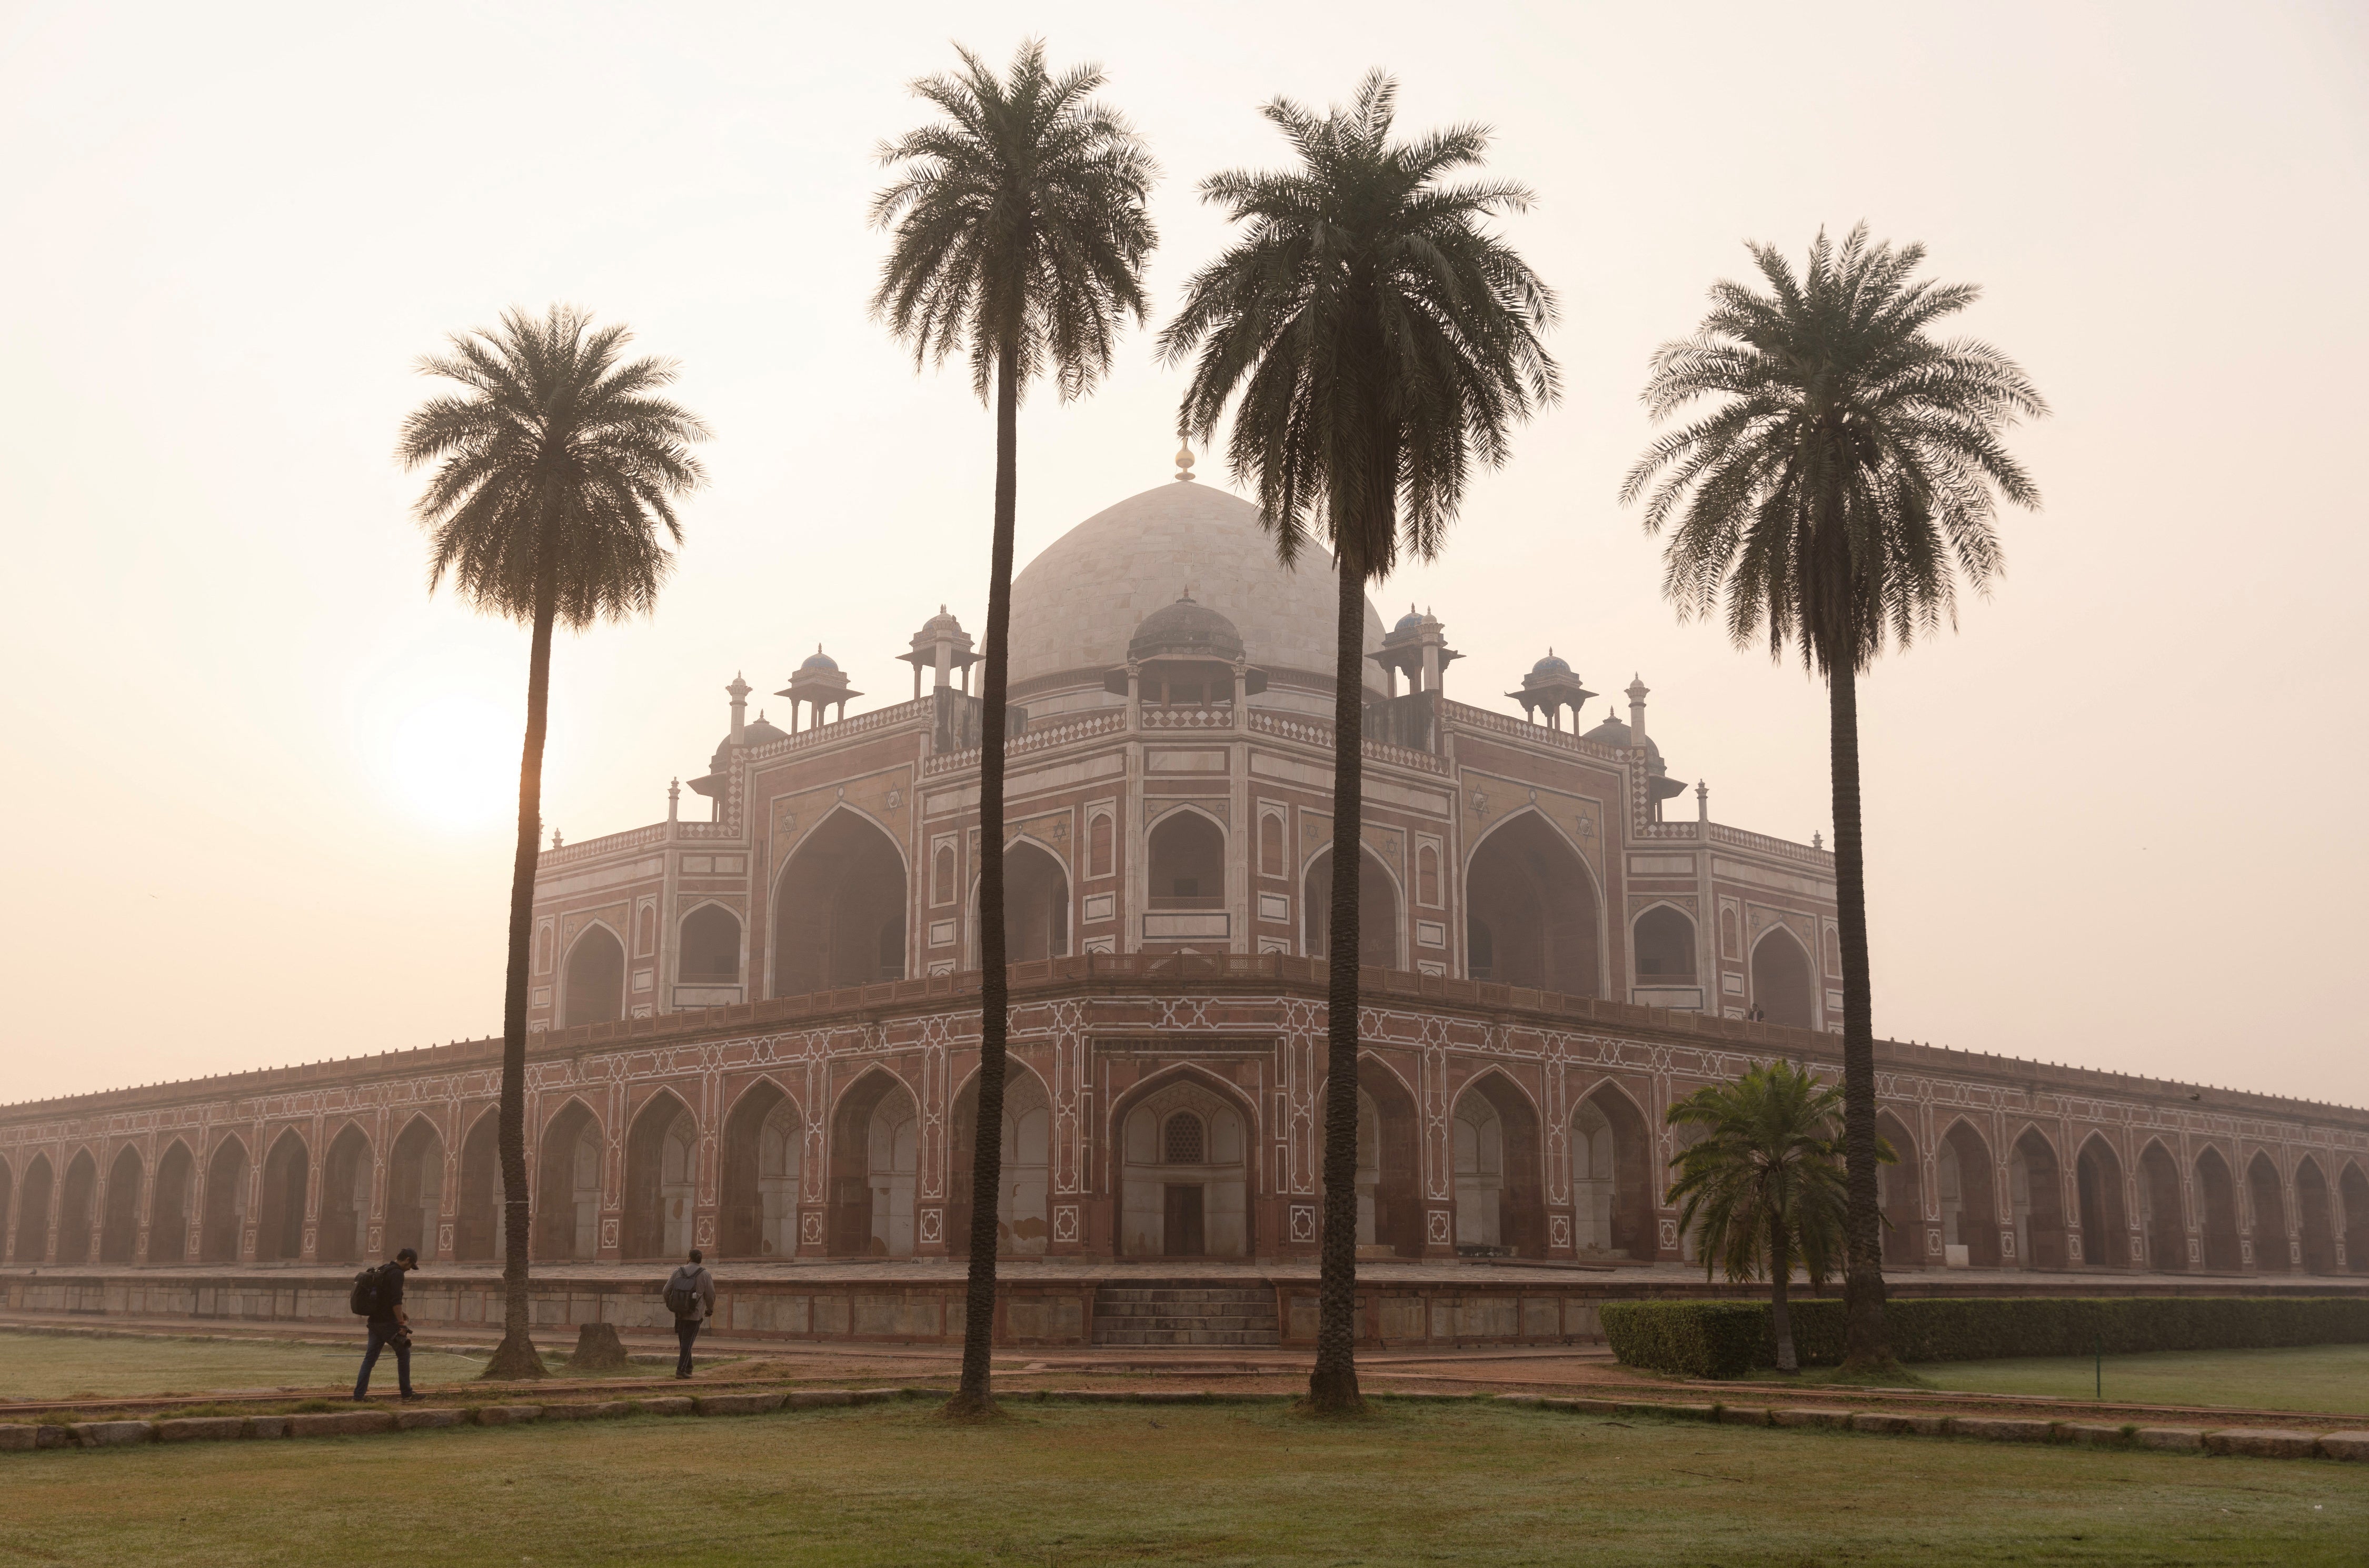 People walk in front of Humayun’s Tomb under morning smog